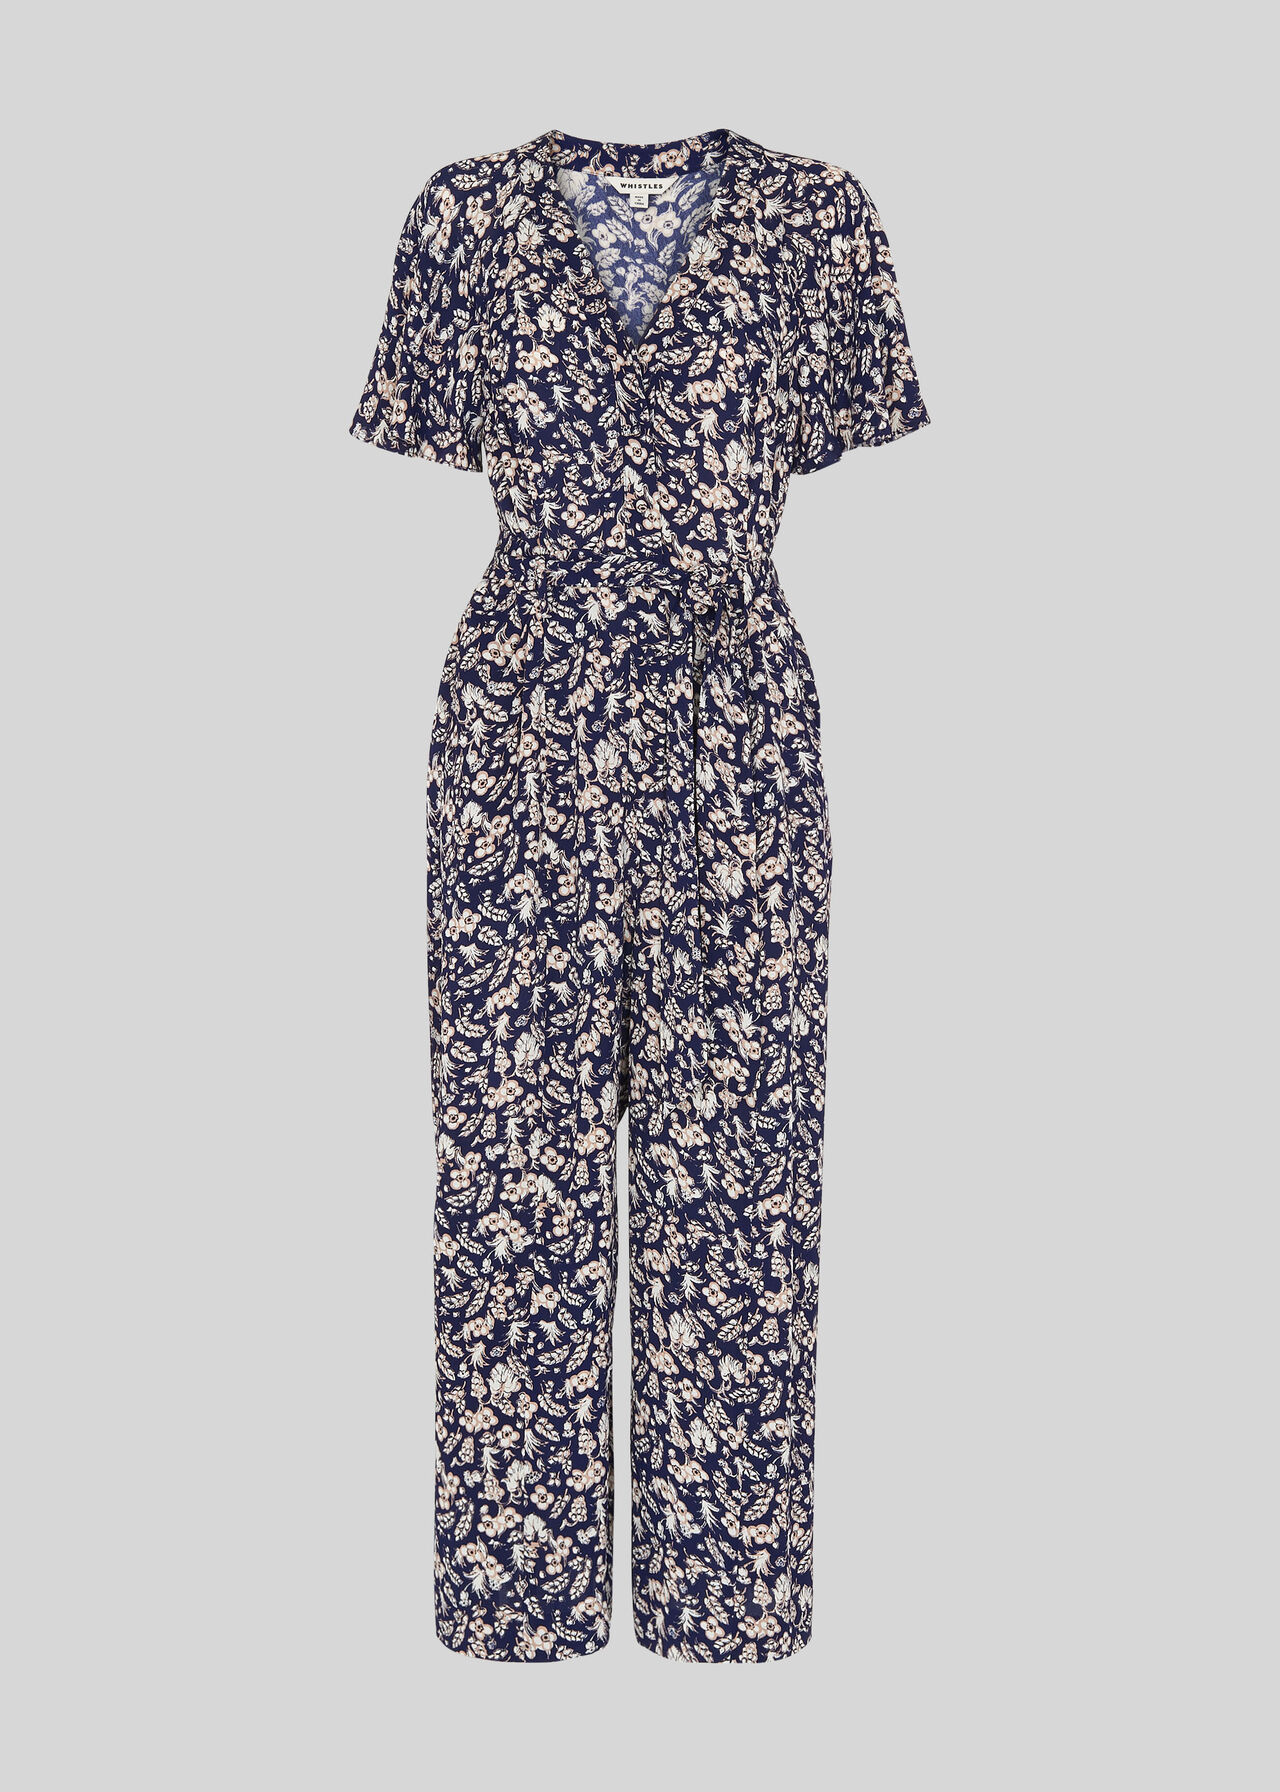 Navy/Multi Wheat Floral Jumpsuit | WHISTLES